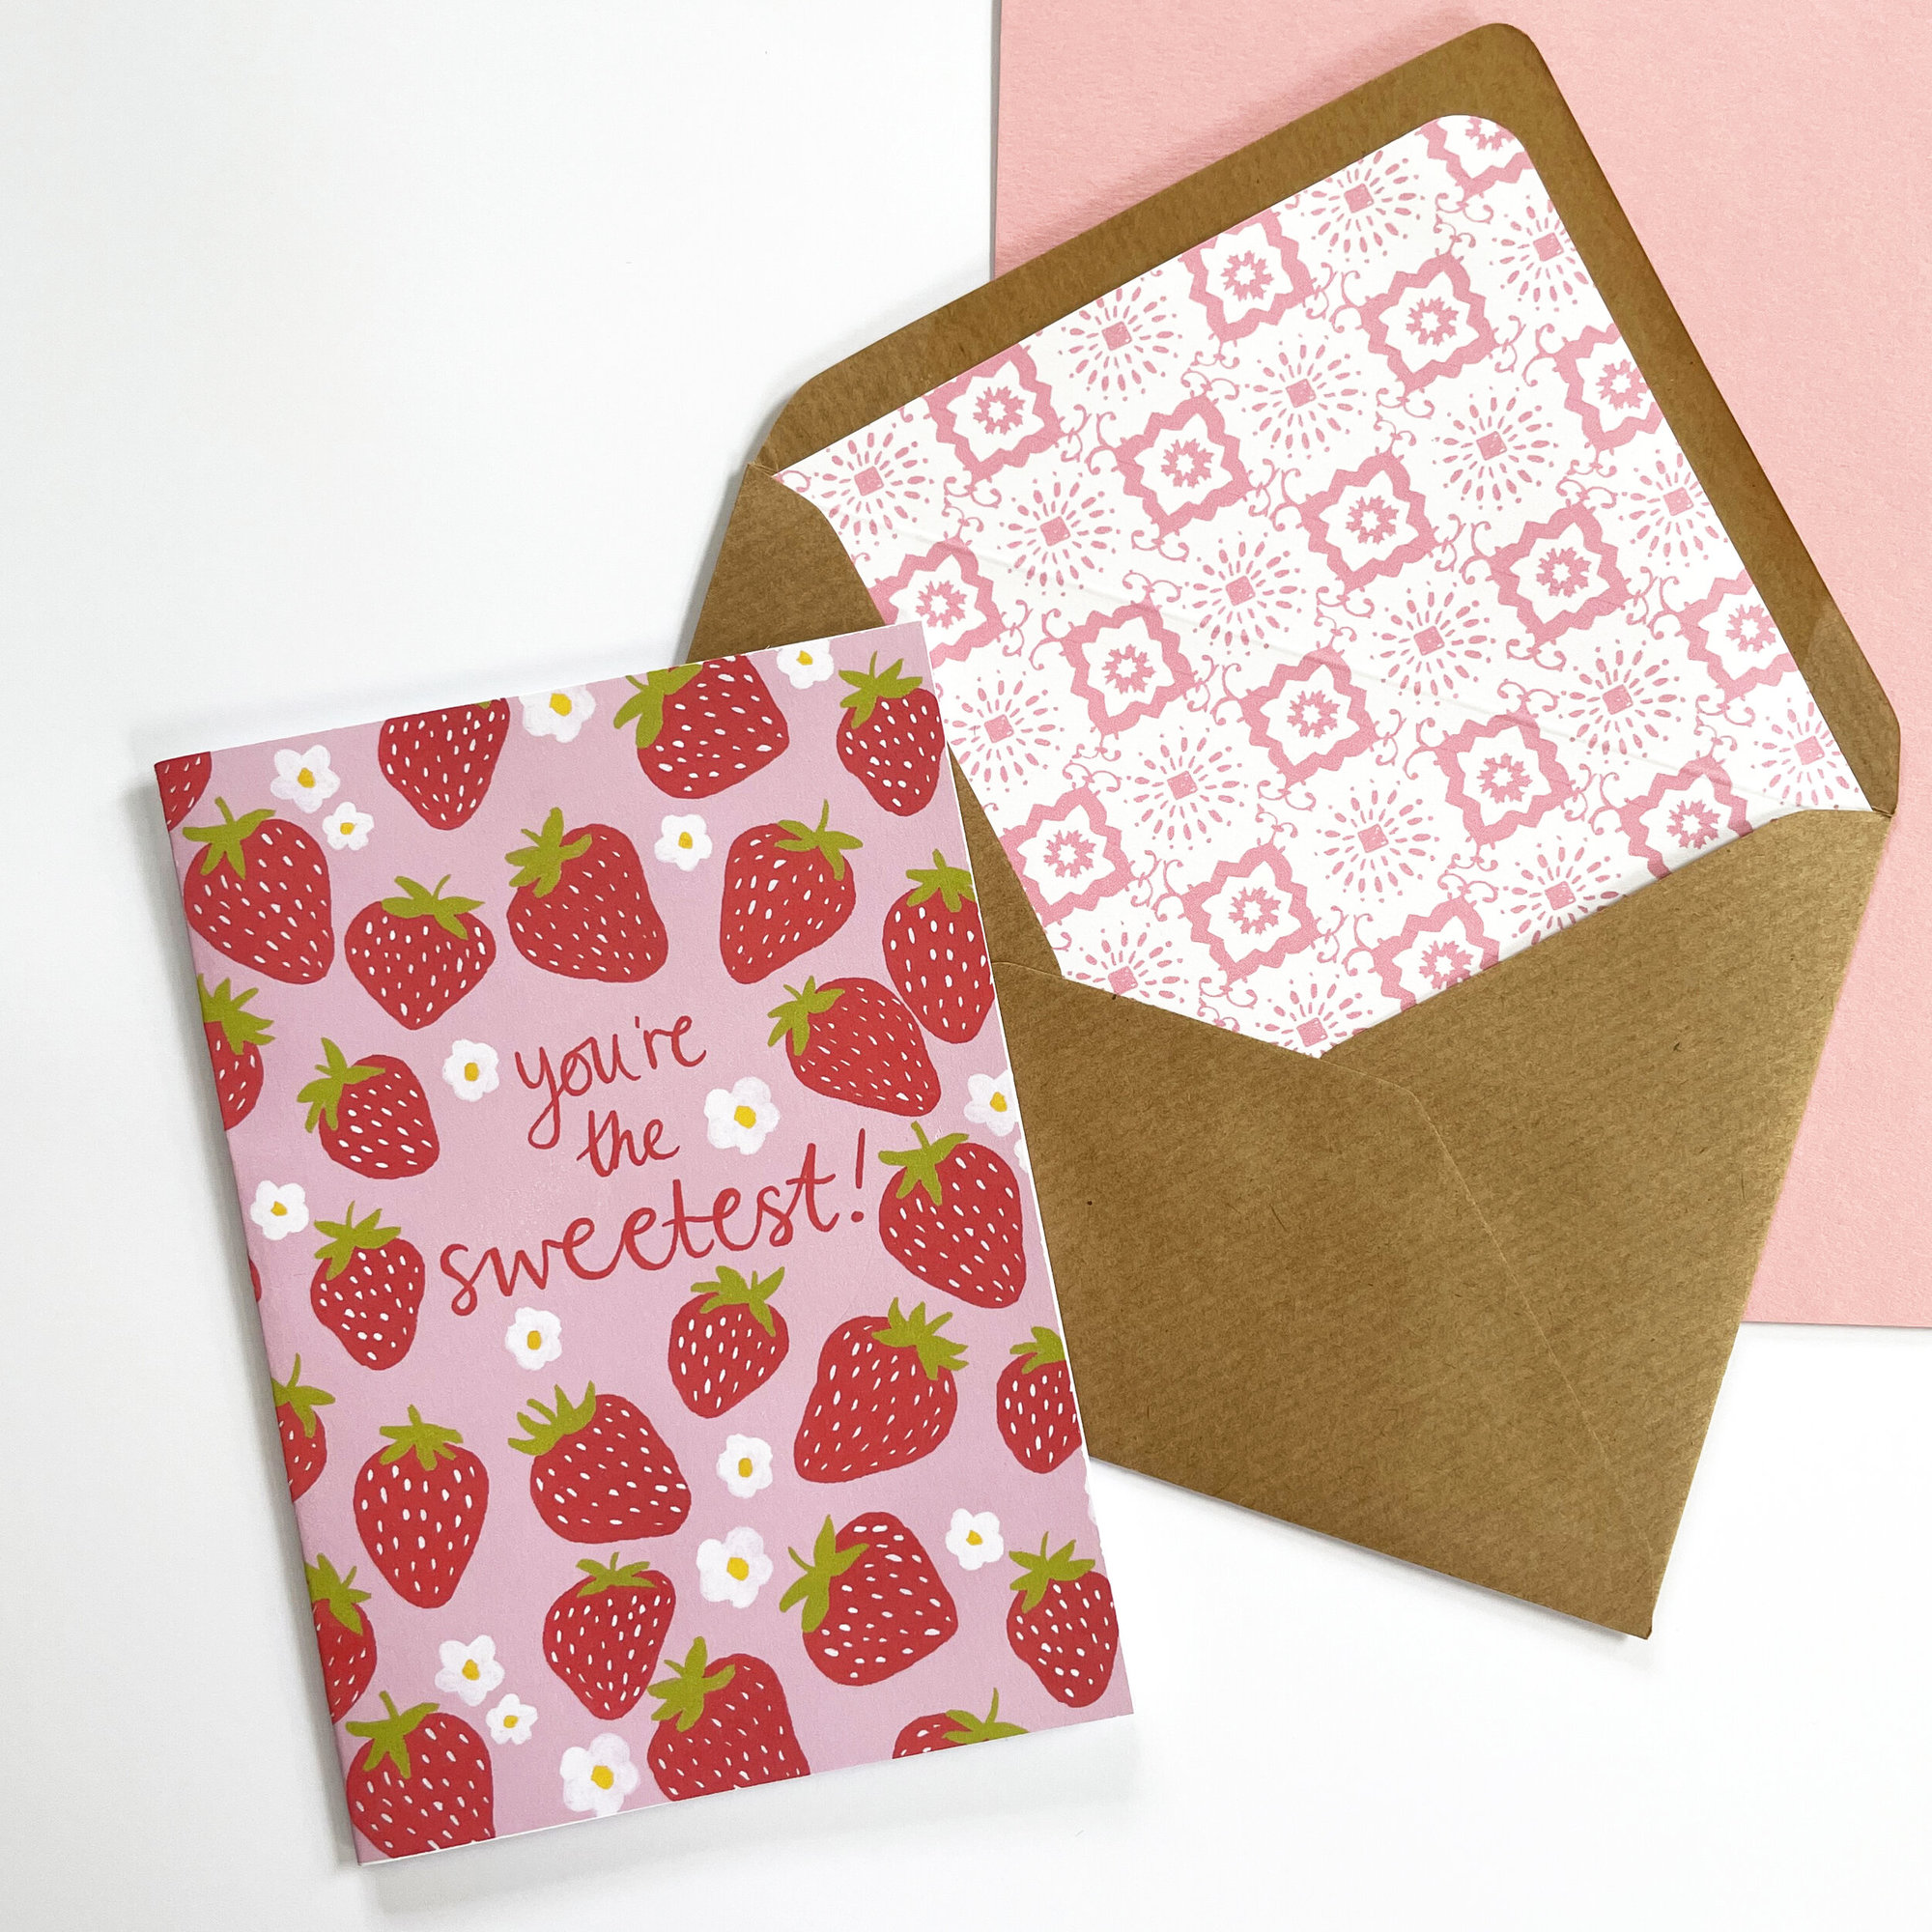 'you Are The Sweetest!' Strawberries Card - Just the card, Lined Envelope